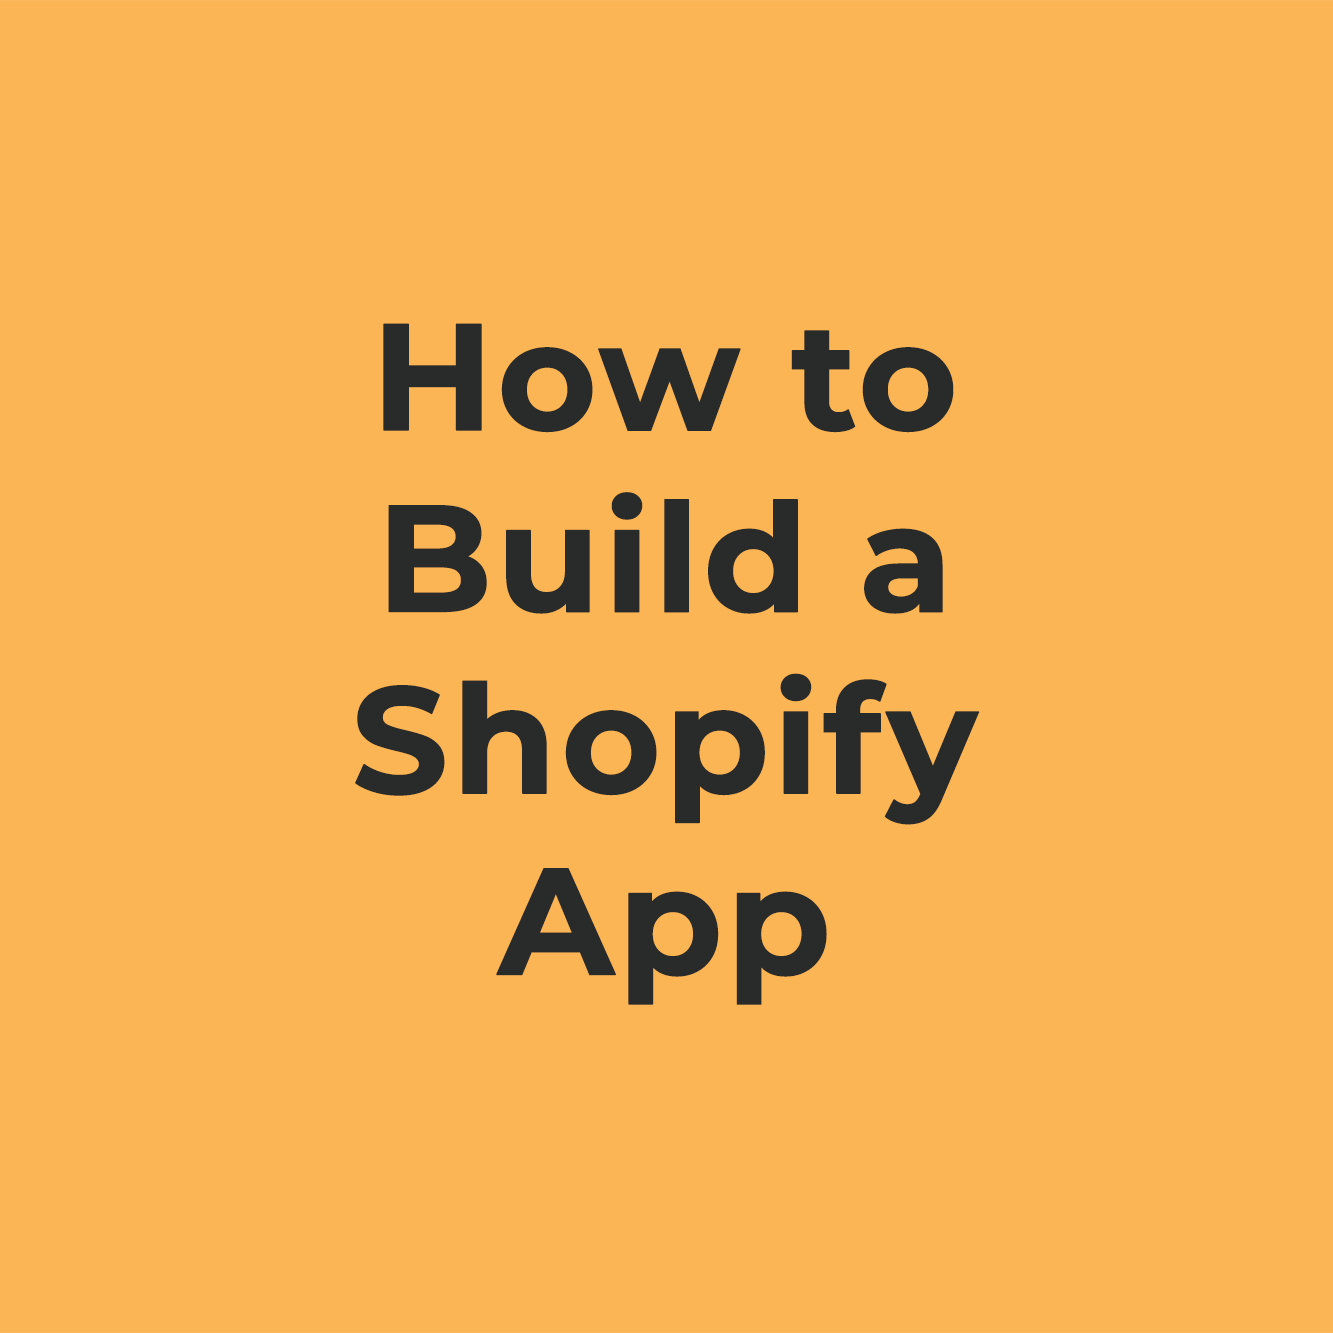 How to Build a Shopify App